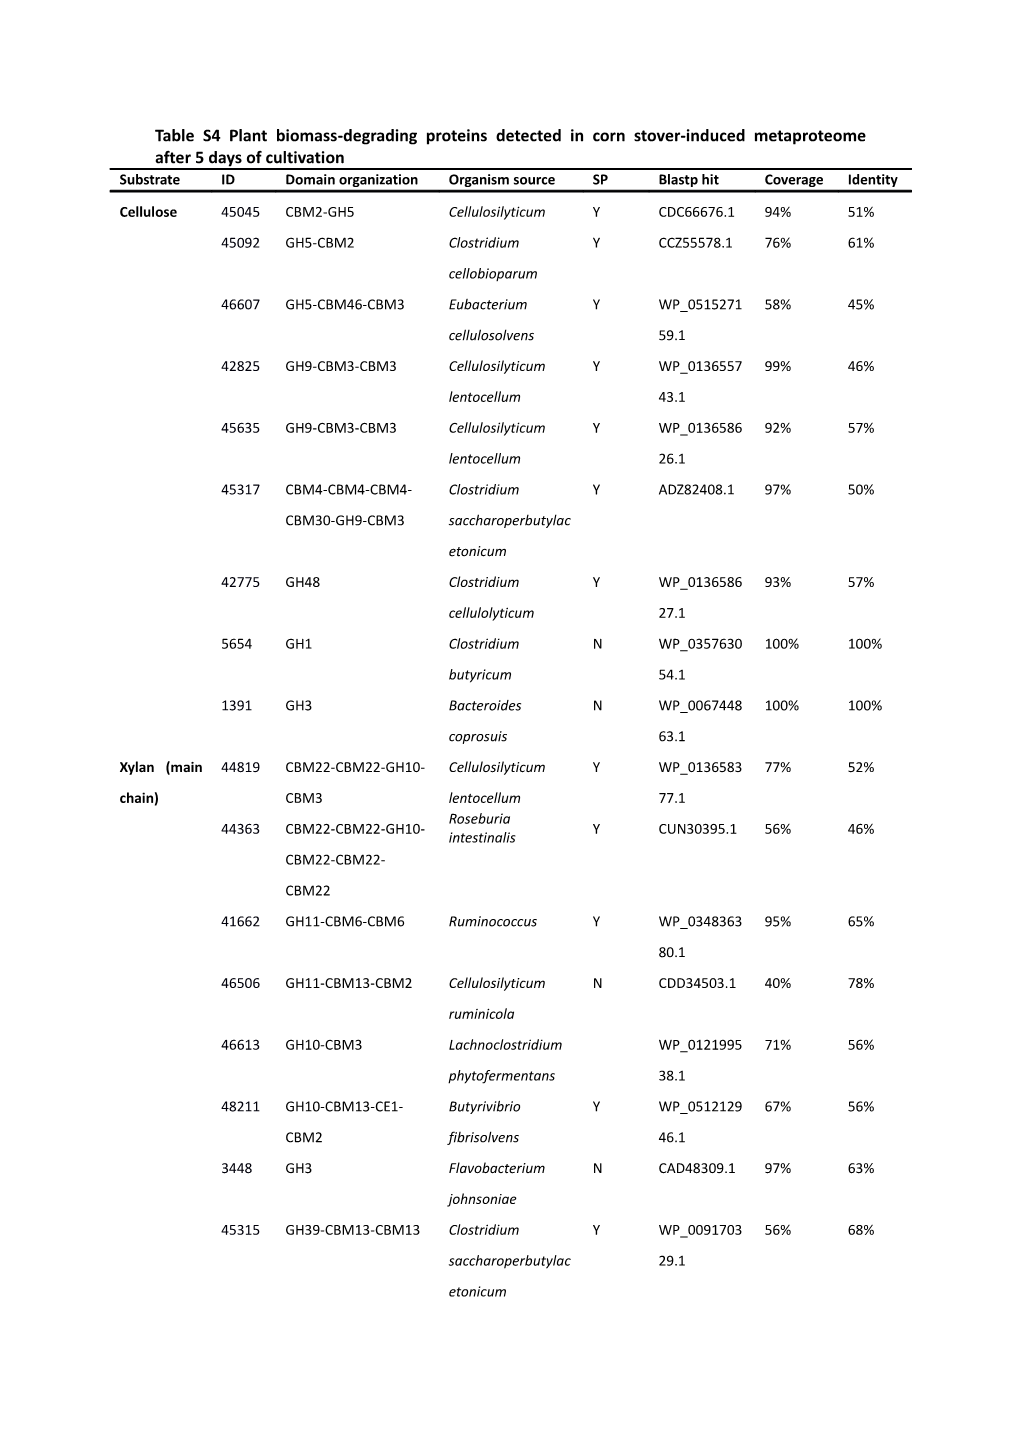 Table S4plant Biomass-Degrading Proteins Detected in Corn Stover-Inducedmetaproteome After